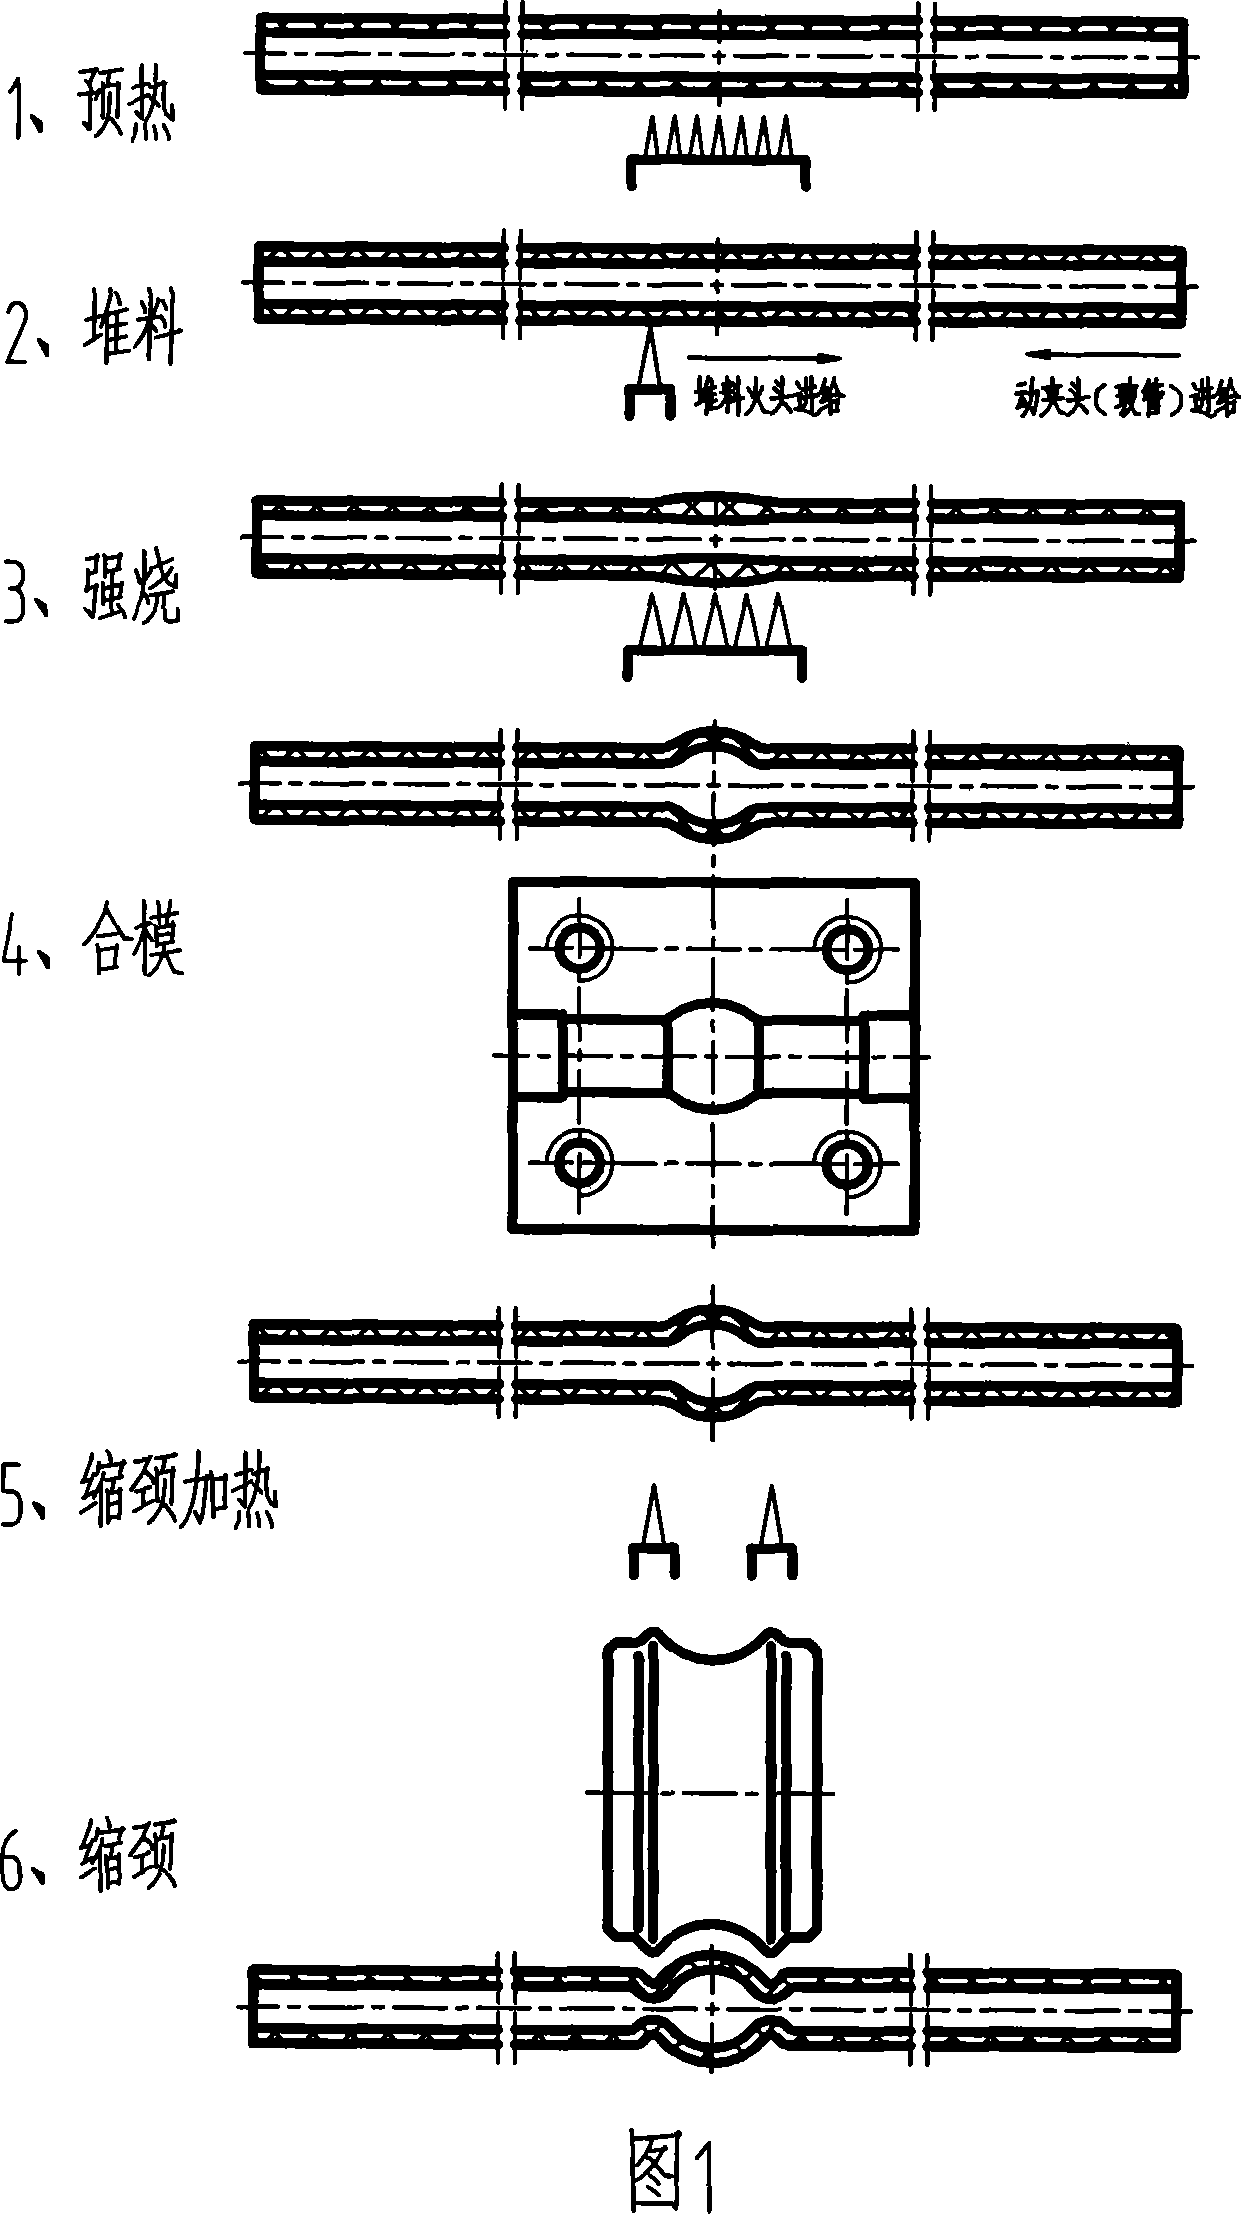 Metal halide lamp electrical arc tube and neck ampulla contracting shell interlocking machine, forming and necking method